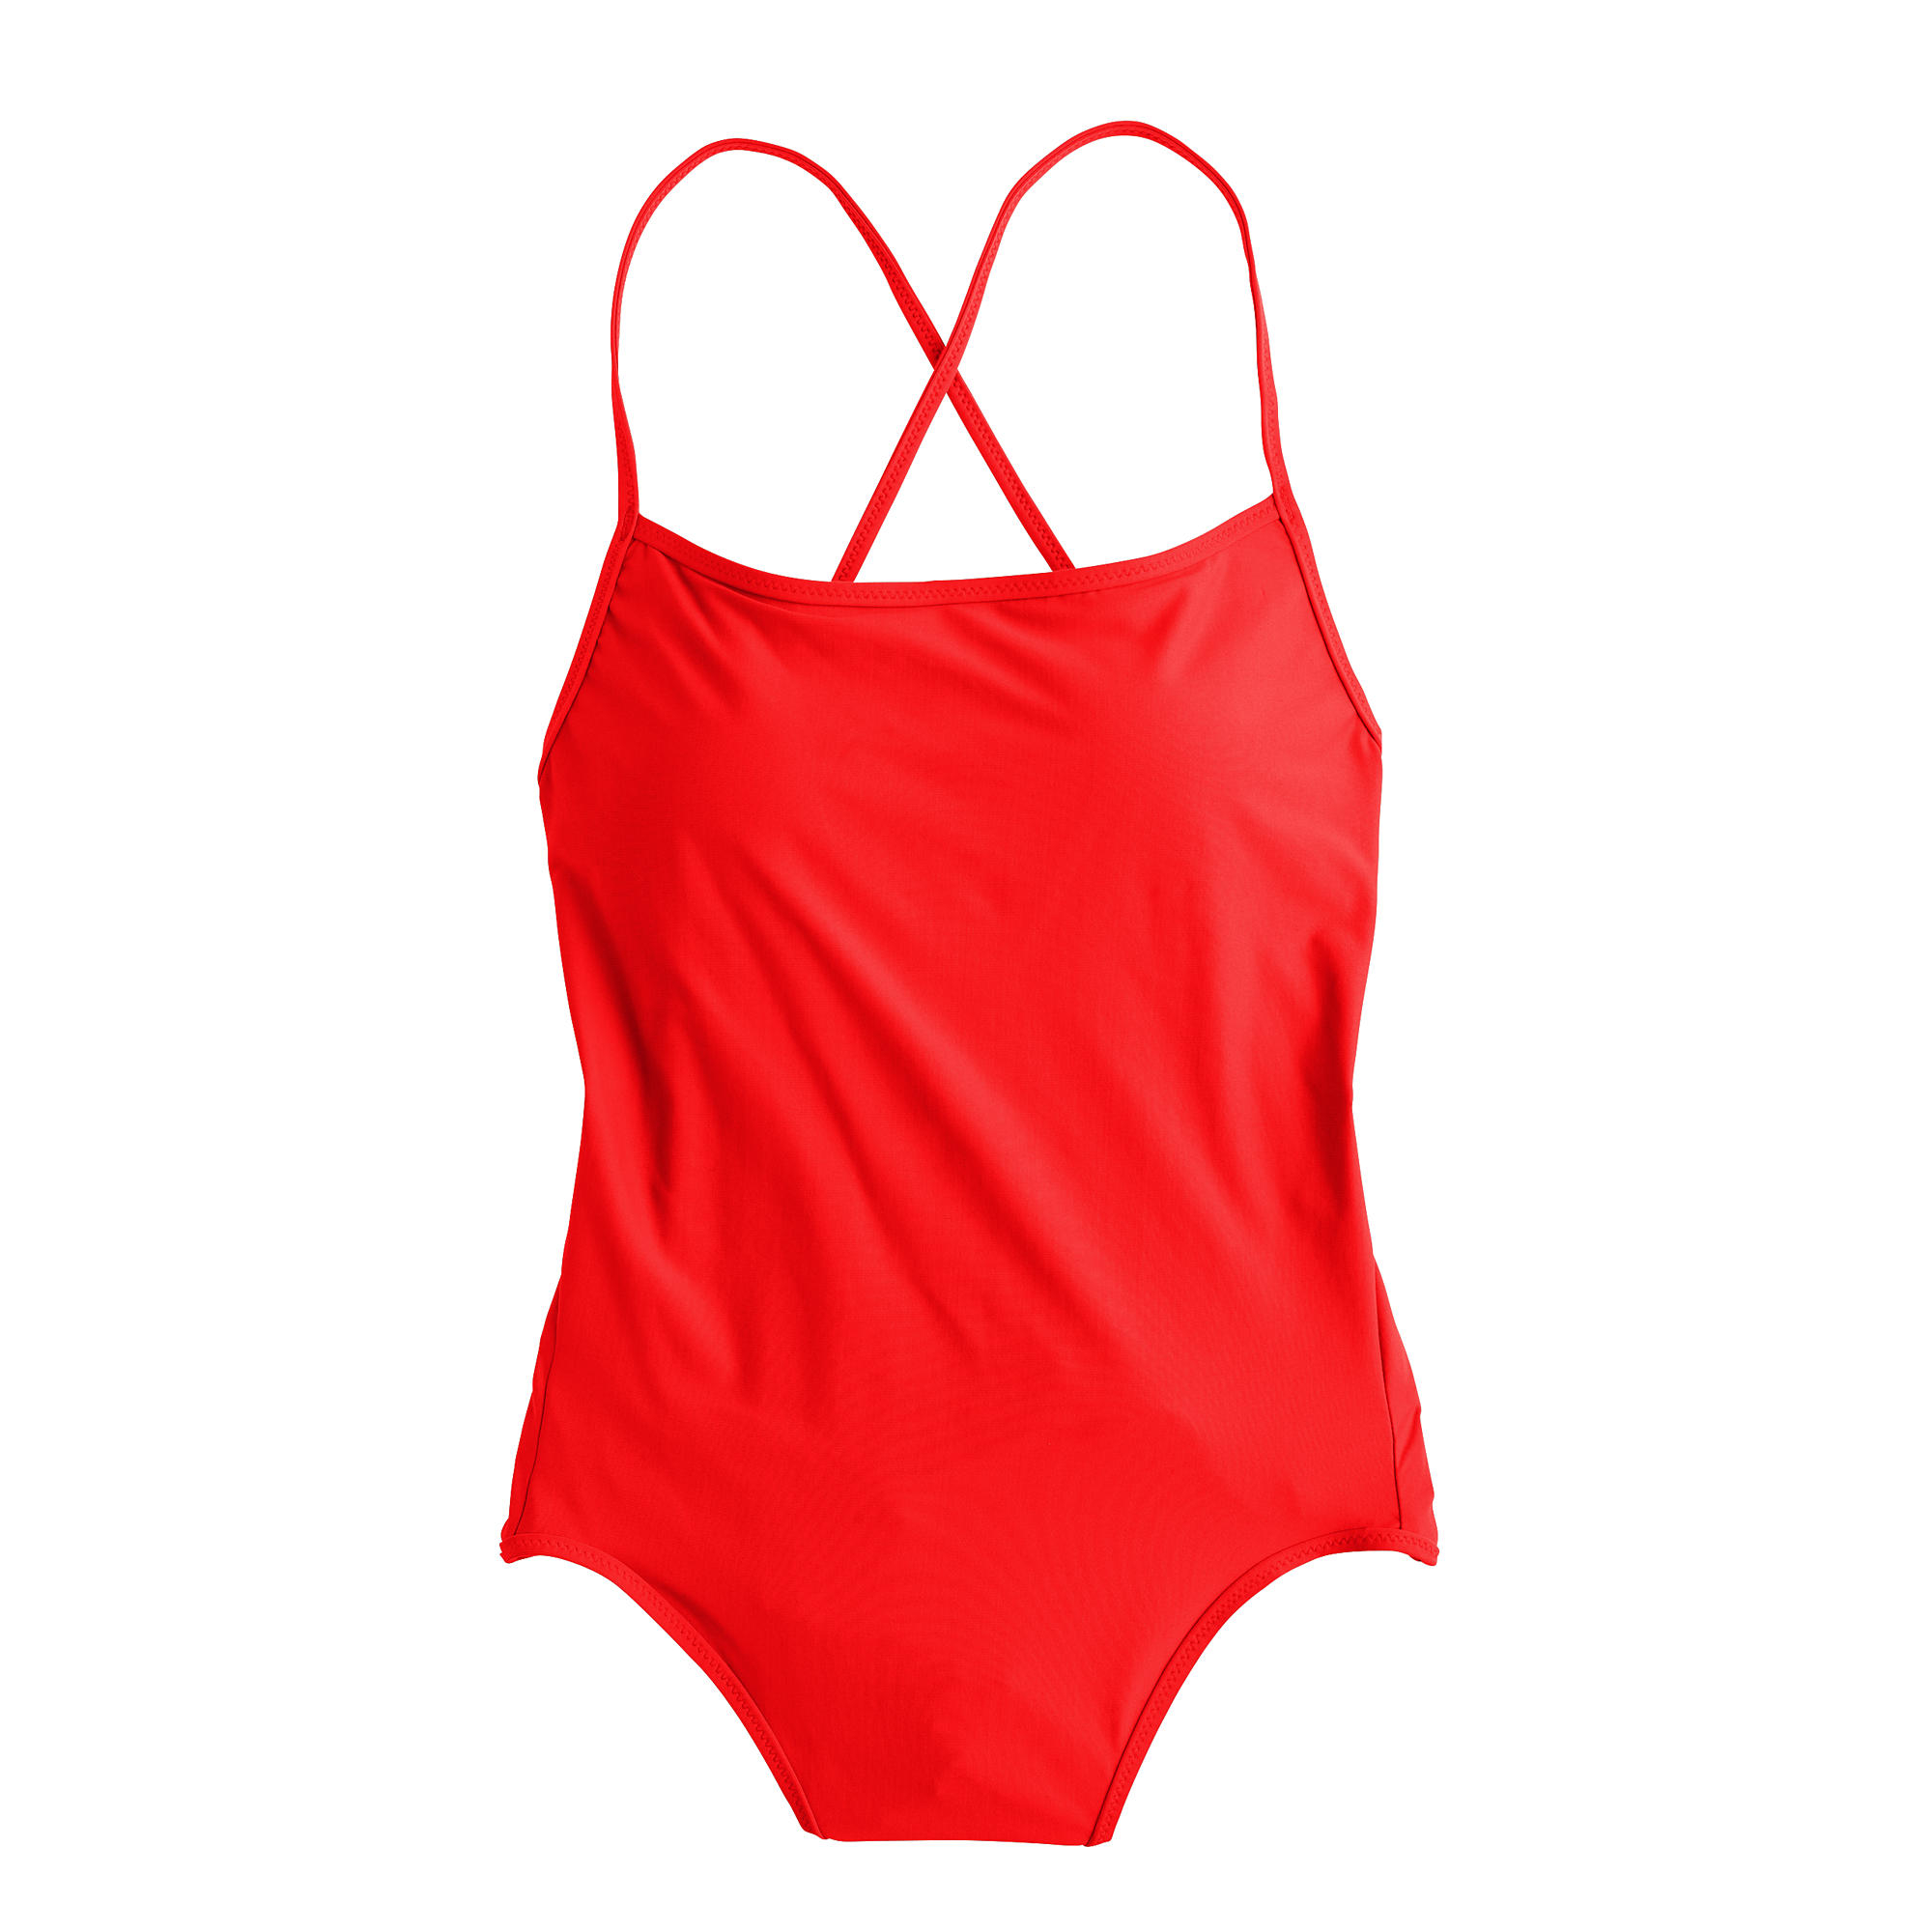 J.crew Tie-back One-piece Swimsuit in Red | Lyst